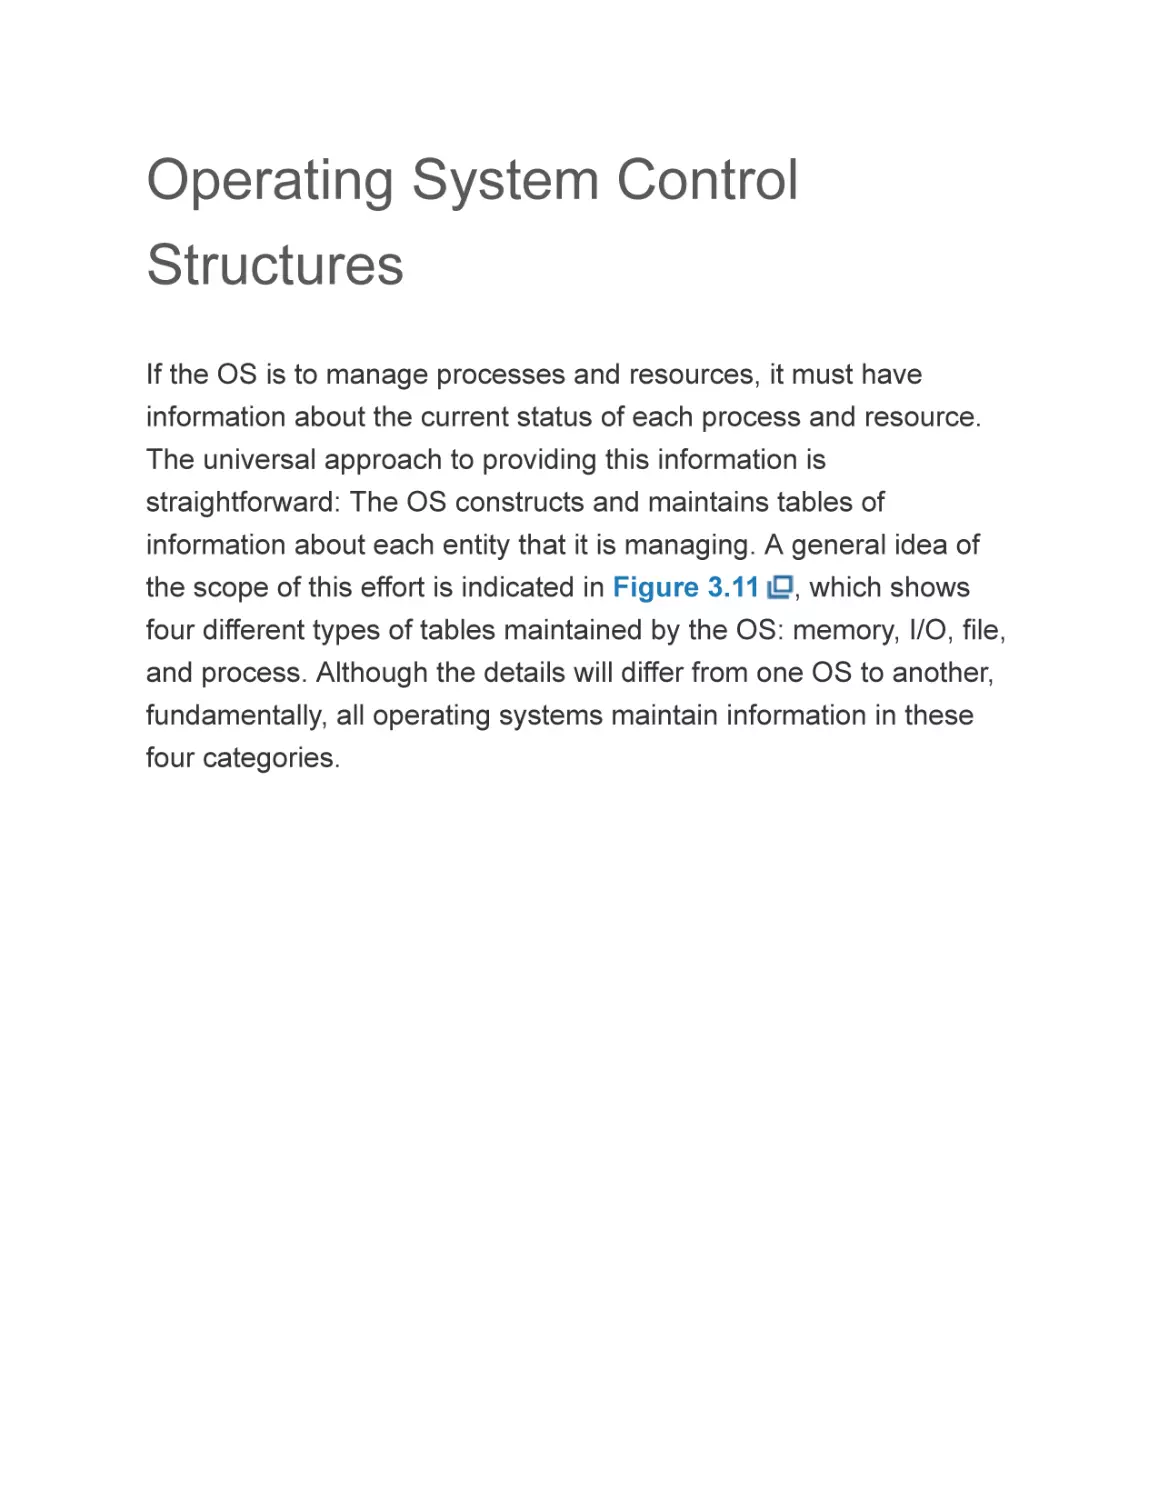 Operating System Control Structures